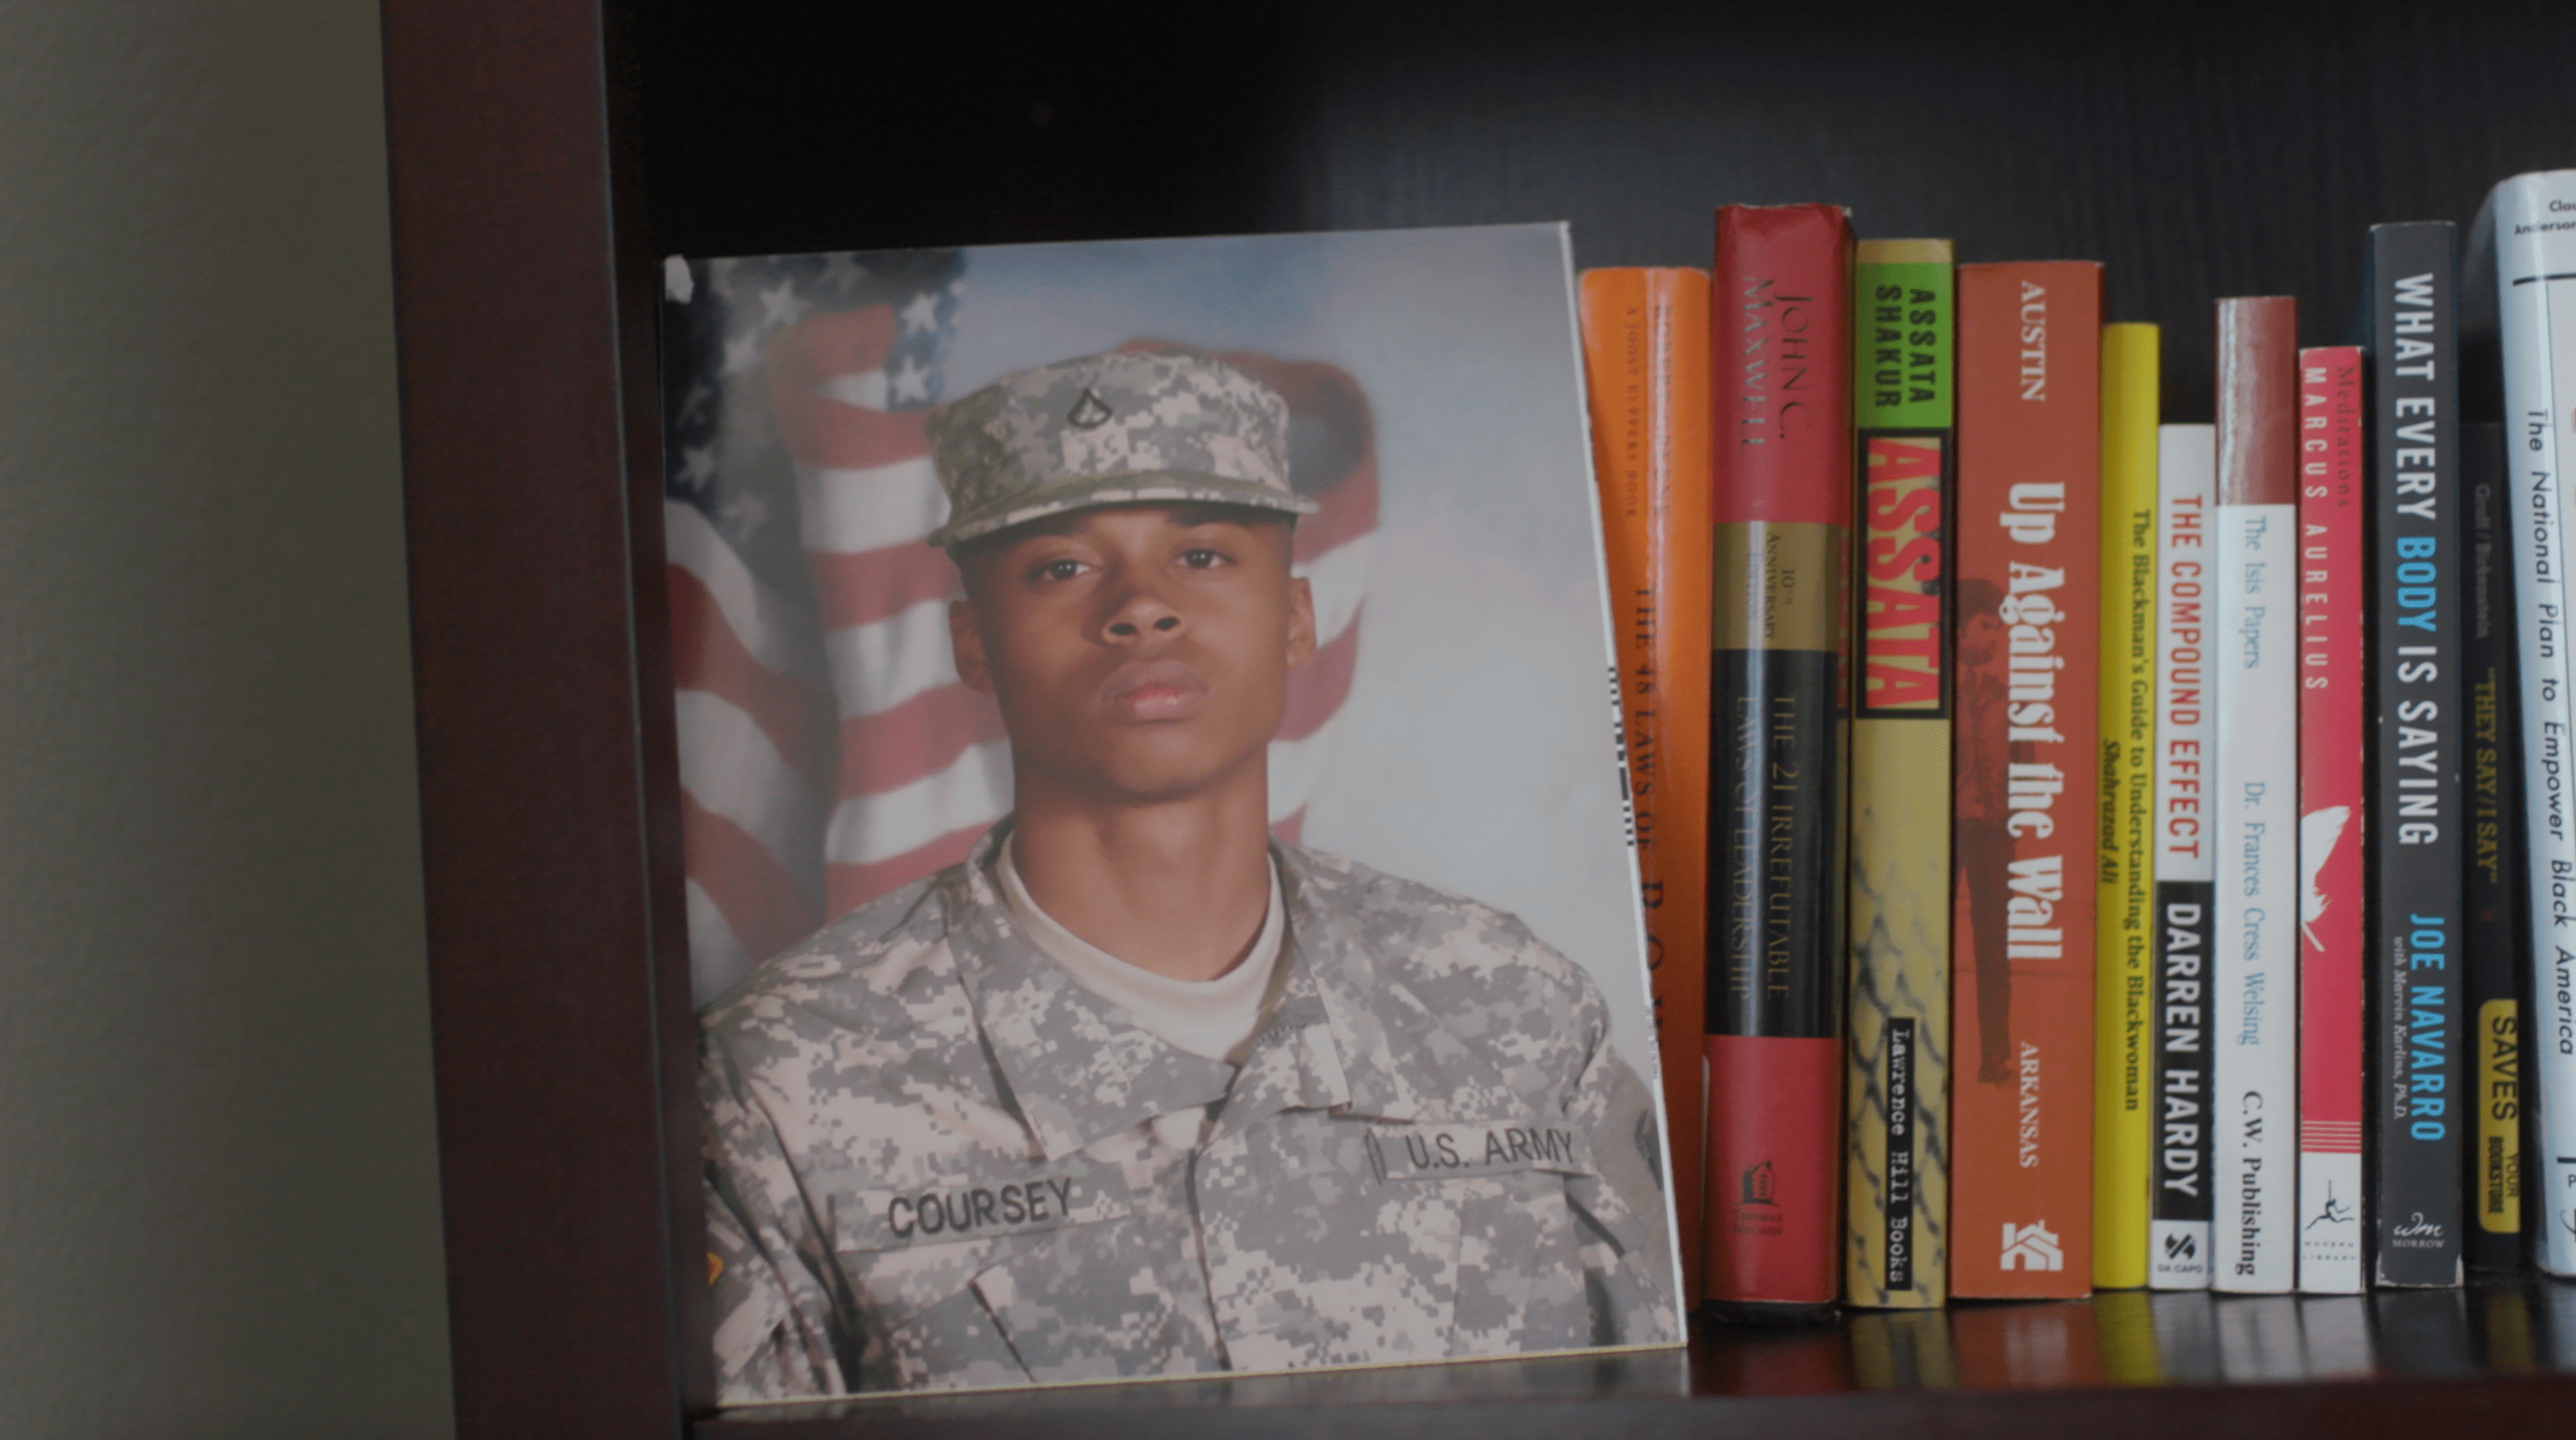 Veteran displays Army portrait on a bookshelf in his home